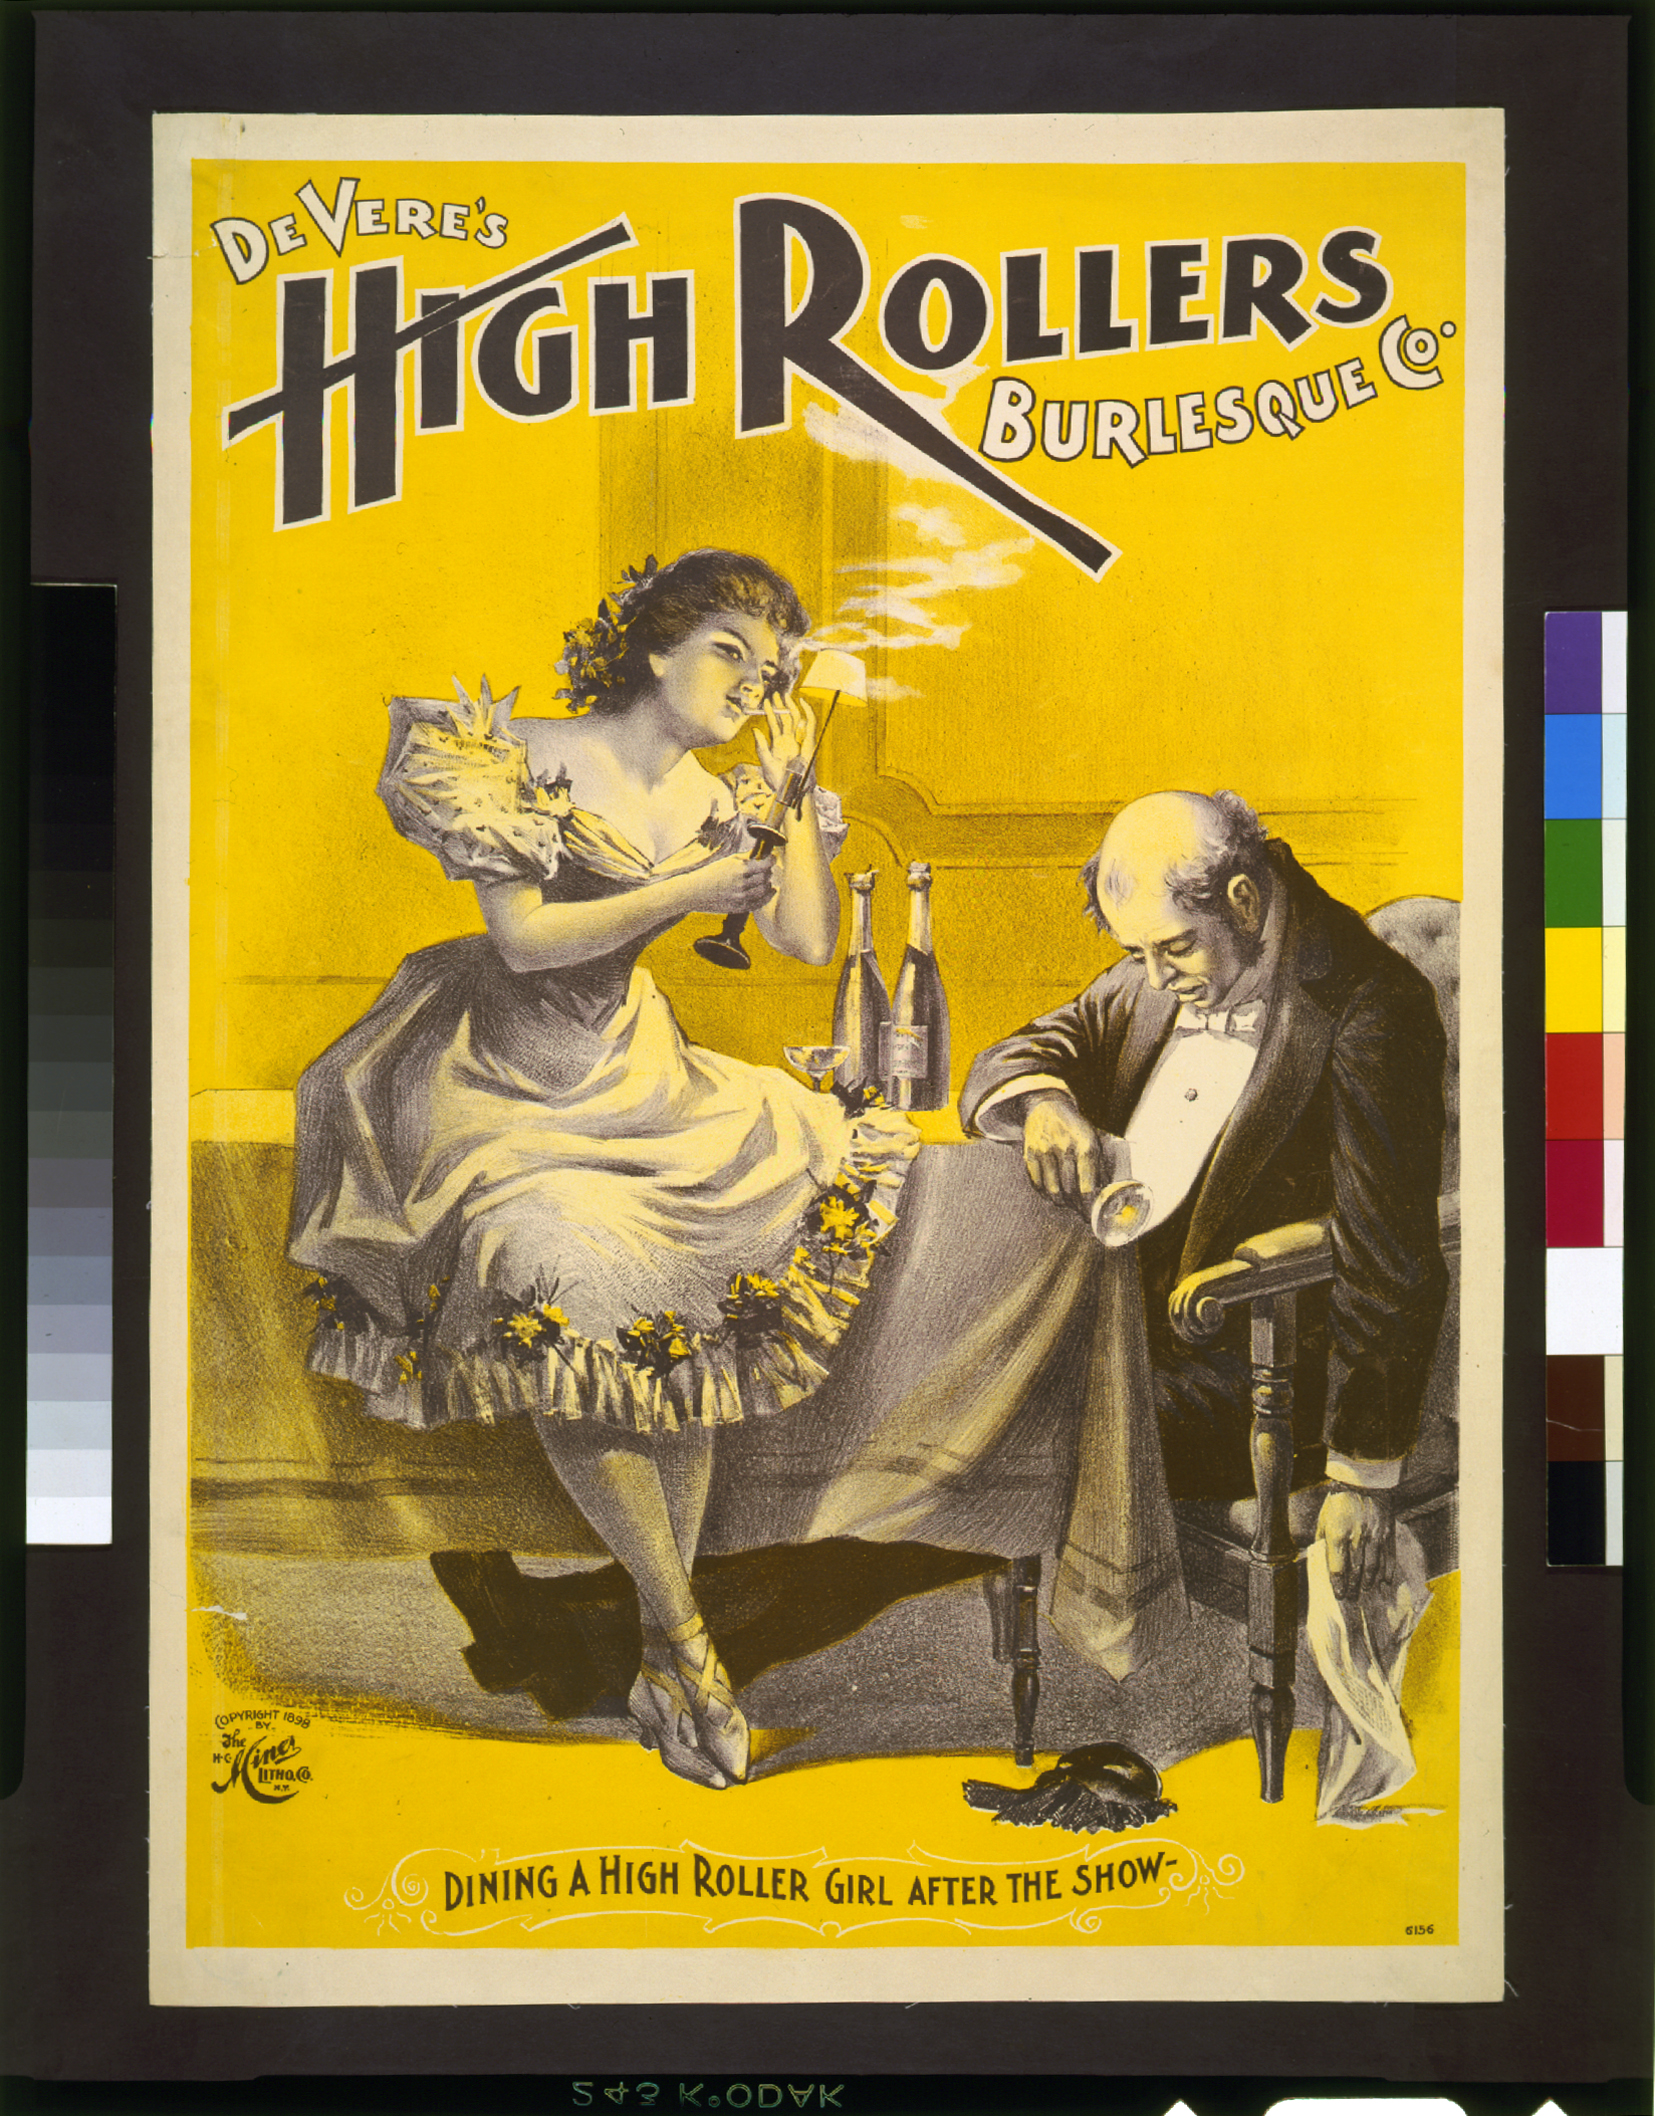 A promotional poster for the burlesque group named High Rollers Burlesque Company. Poster illustration depicts unnamed High Rollers woman member sitting on a table, lighting a cigarette off the table candle. An elderly gentleman nods off at the table holding a tipped glass of champagne, unaware that his wig has fallen onto the floor. The title at the top reads 'DeVere’s High Rollers Burlesque Co.' The caption at the bottom reads 'DINING A HIGH ROLLER GIRL AFTER THE SHOW-' The poster was received by the US Copyright Office mailroom from the H C Miner Lithography Company on June 13, 1898.